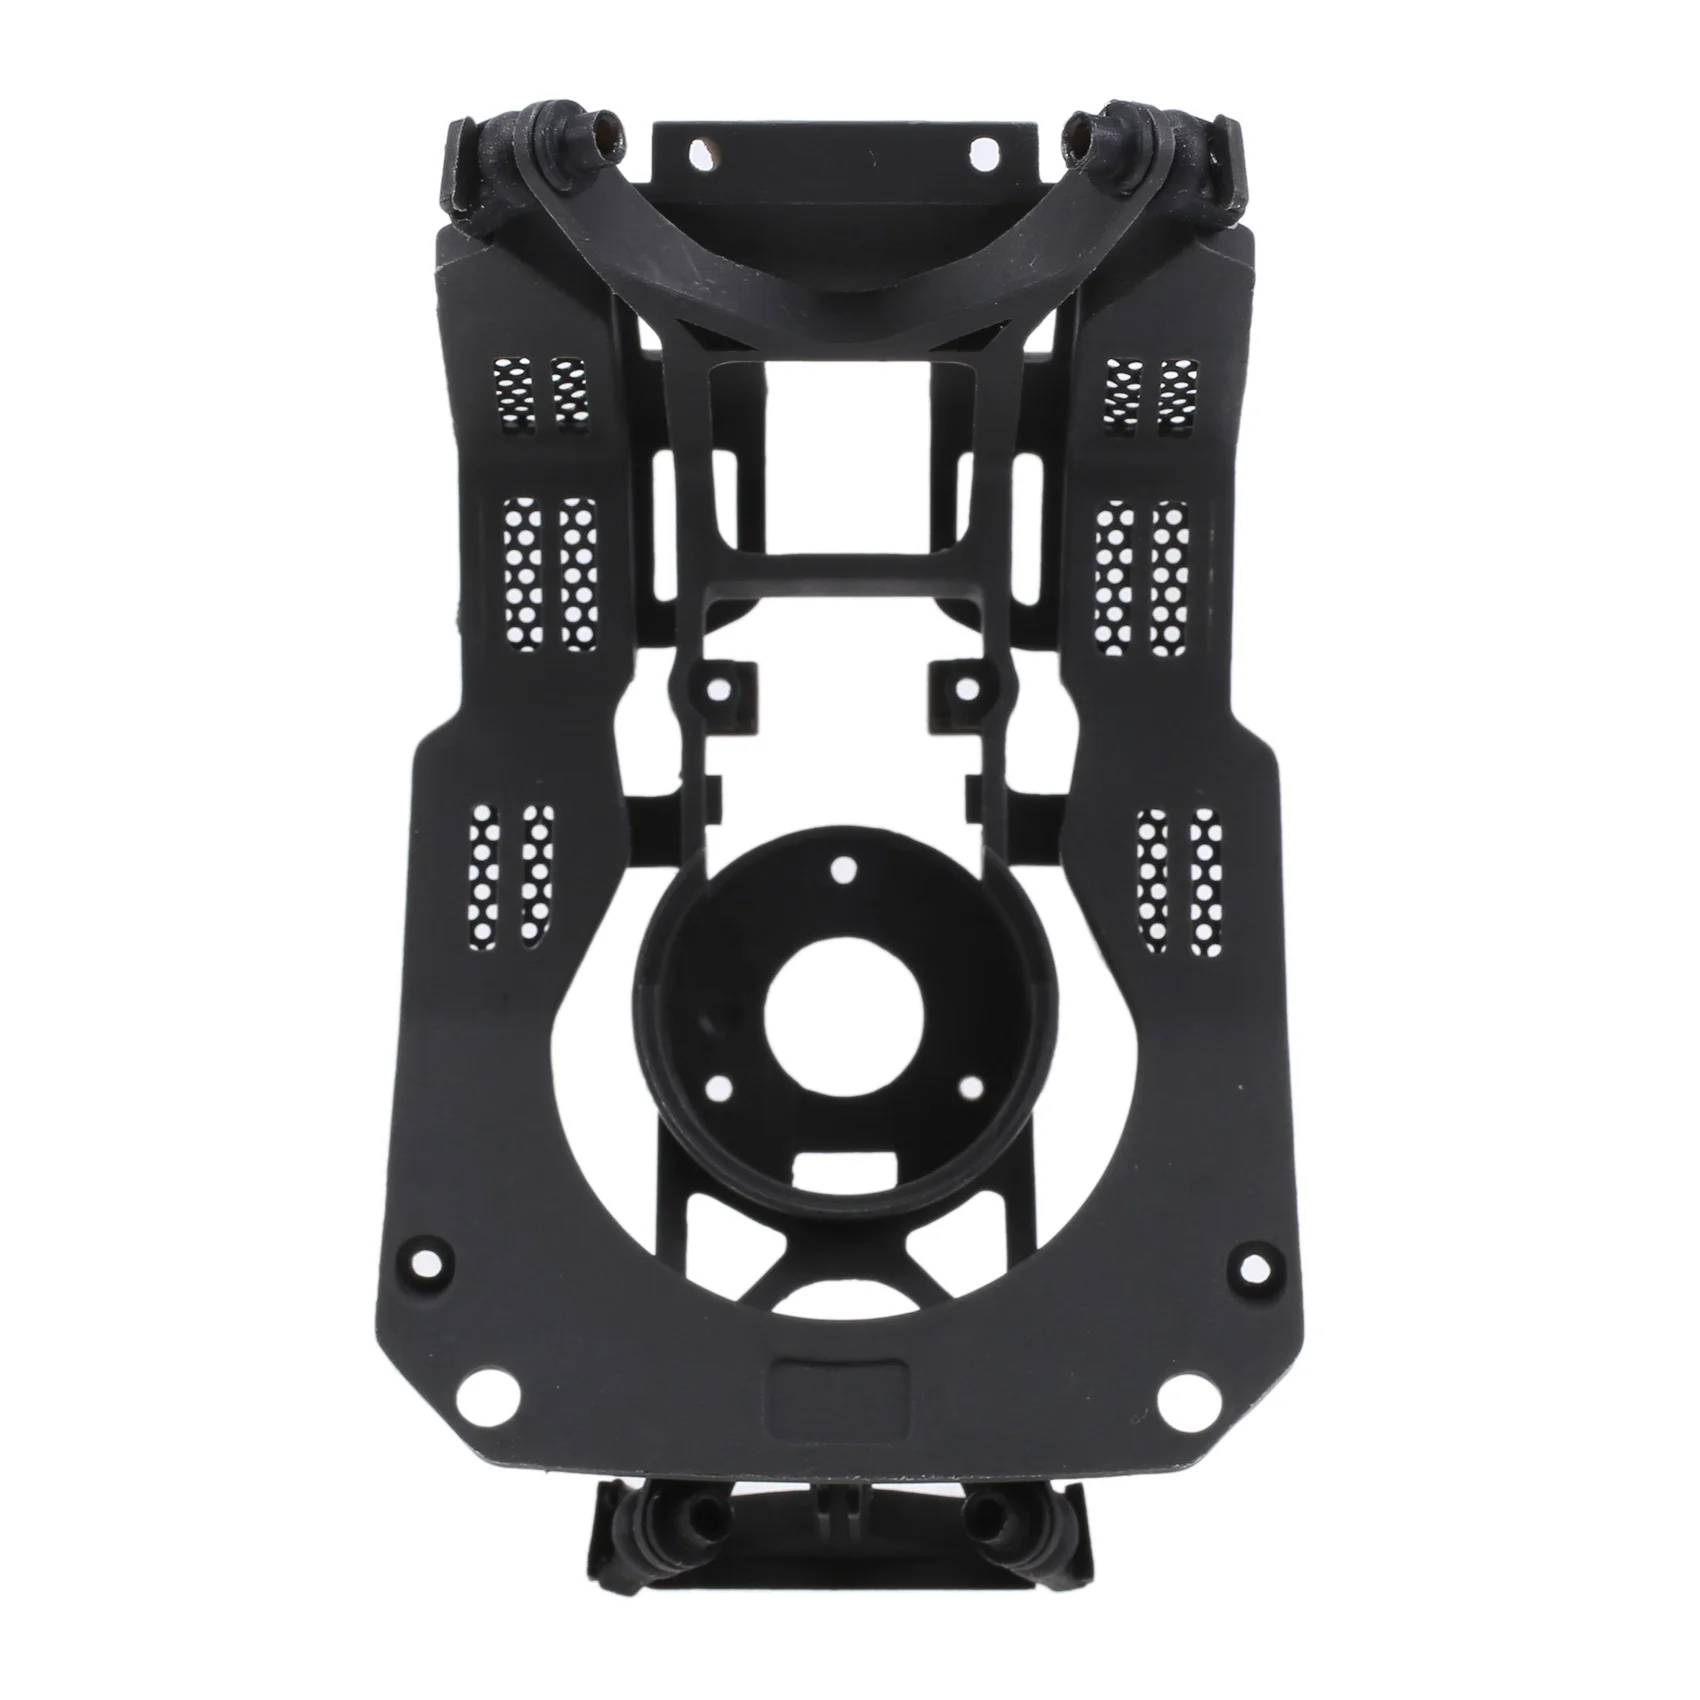 

For DJI MAVIC 3 Gimbal Dampener Mount Shock-Proof Vibration Absorbing Board Shock Plate for Drone Replacement